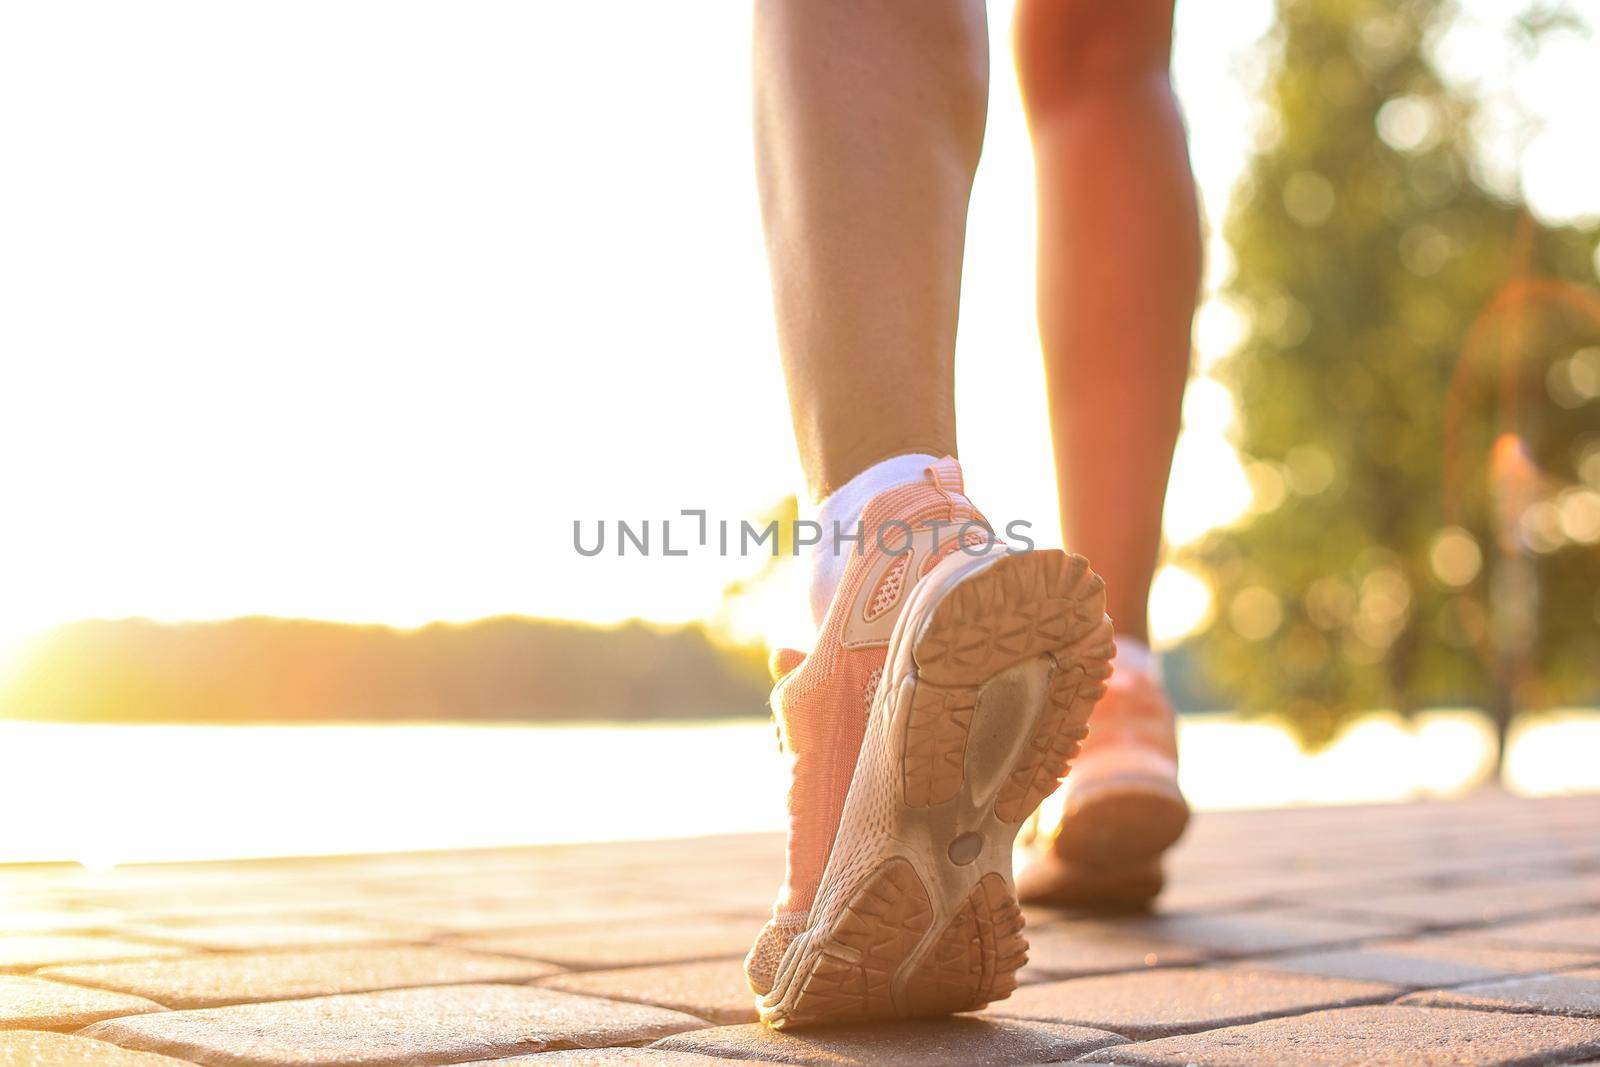 Runner feet running on road closeup on shoe, outdoor at sunset or sunrise. by tsyhun